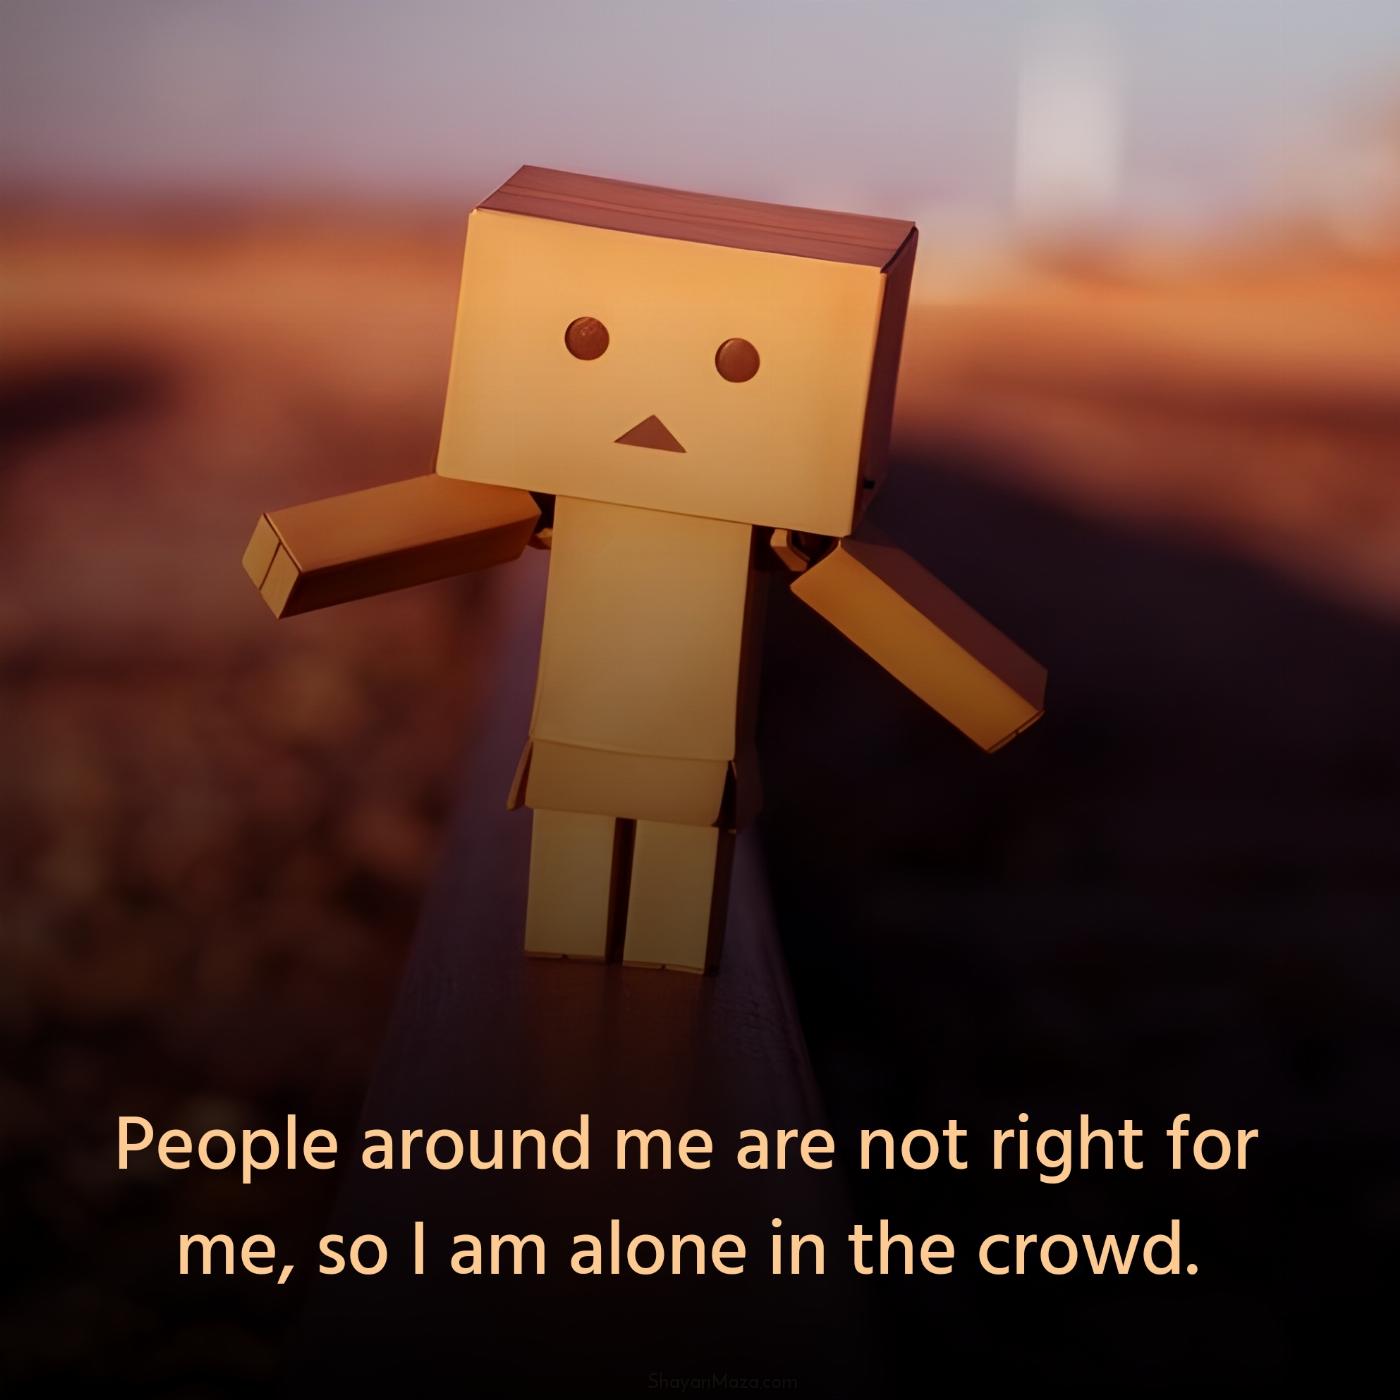 People around me are not right for me